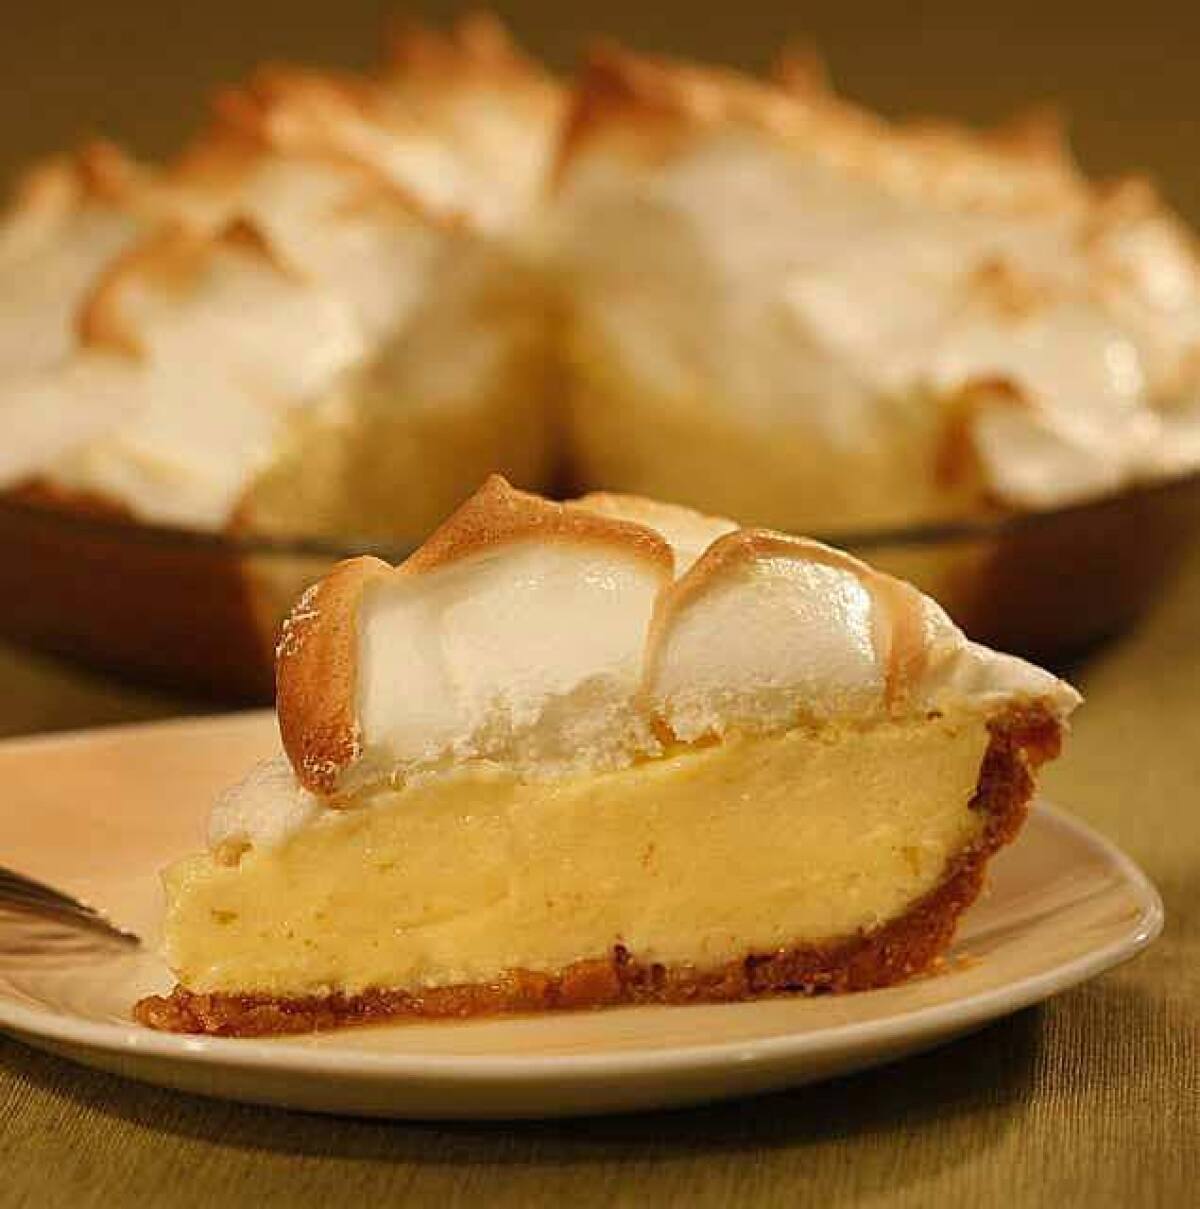 Key lime pie topped with meringue.